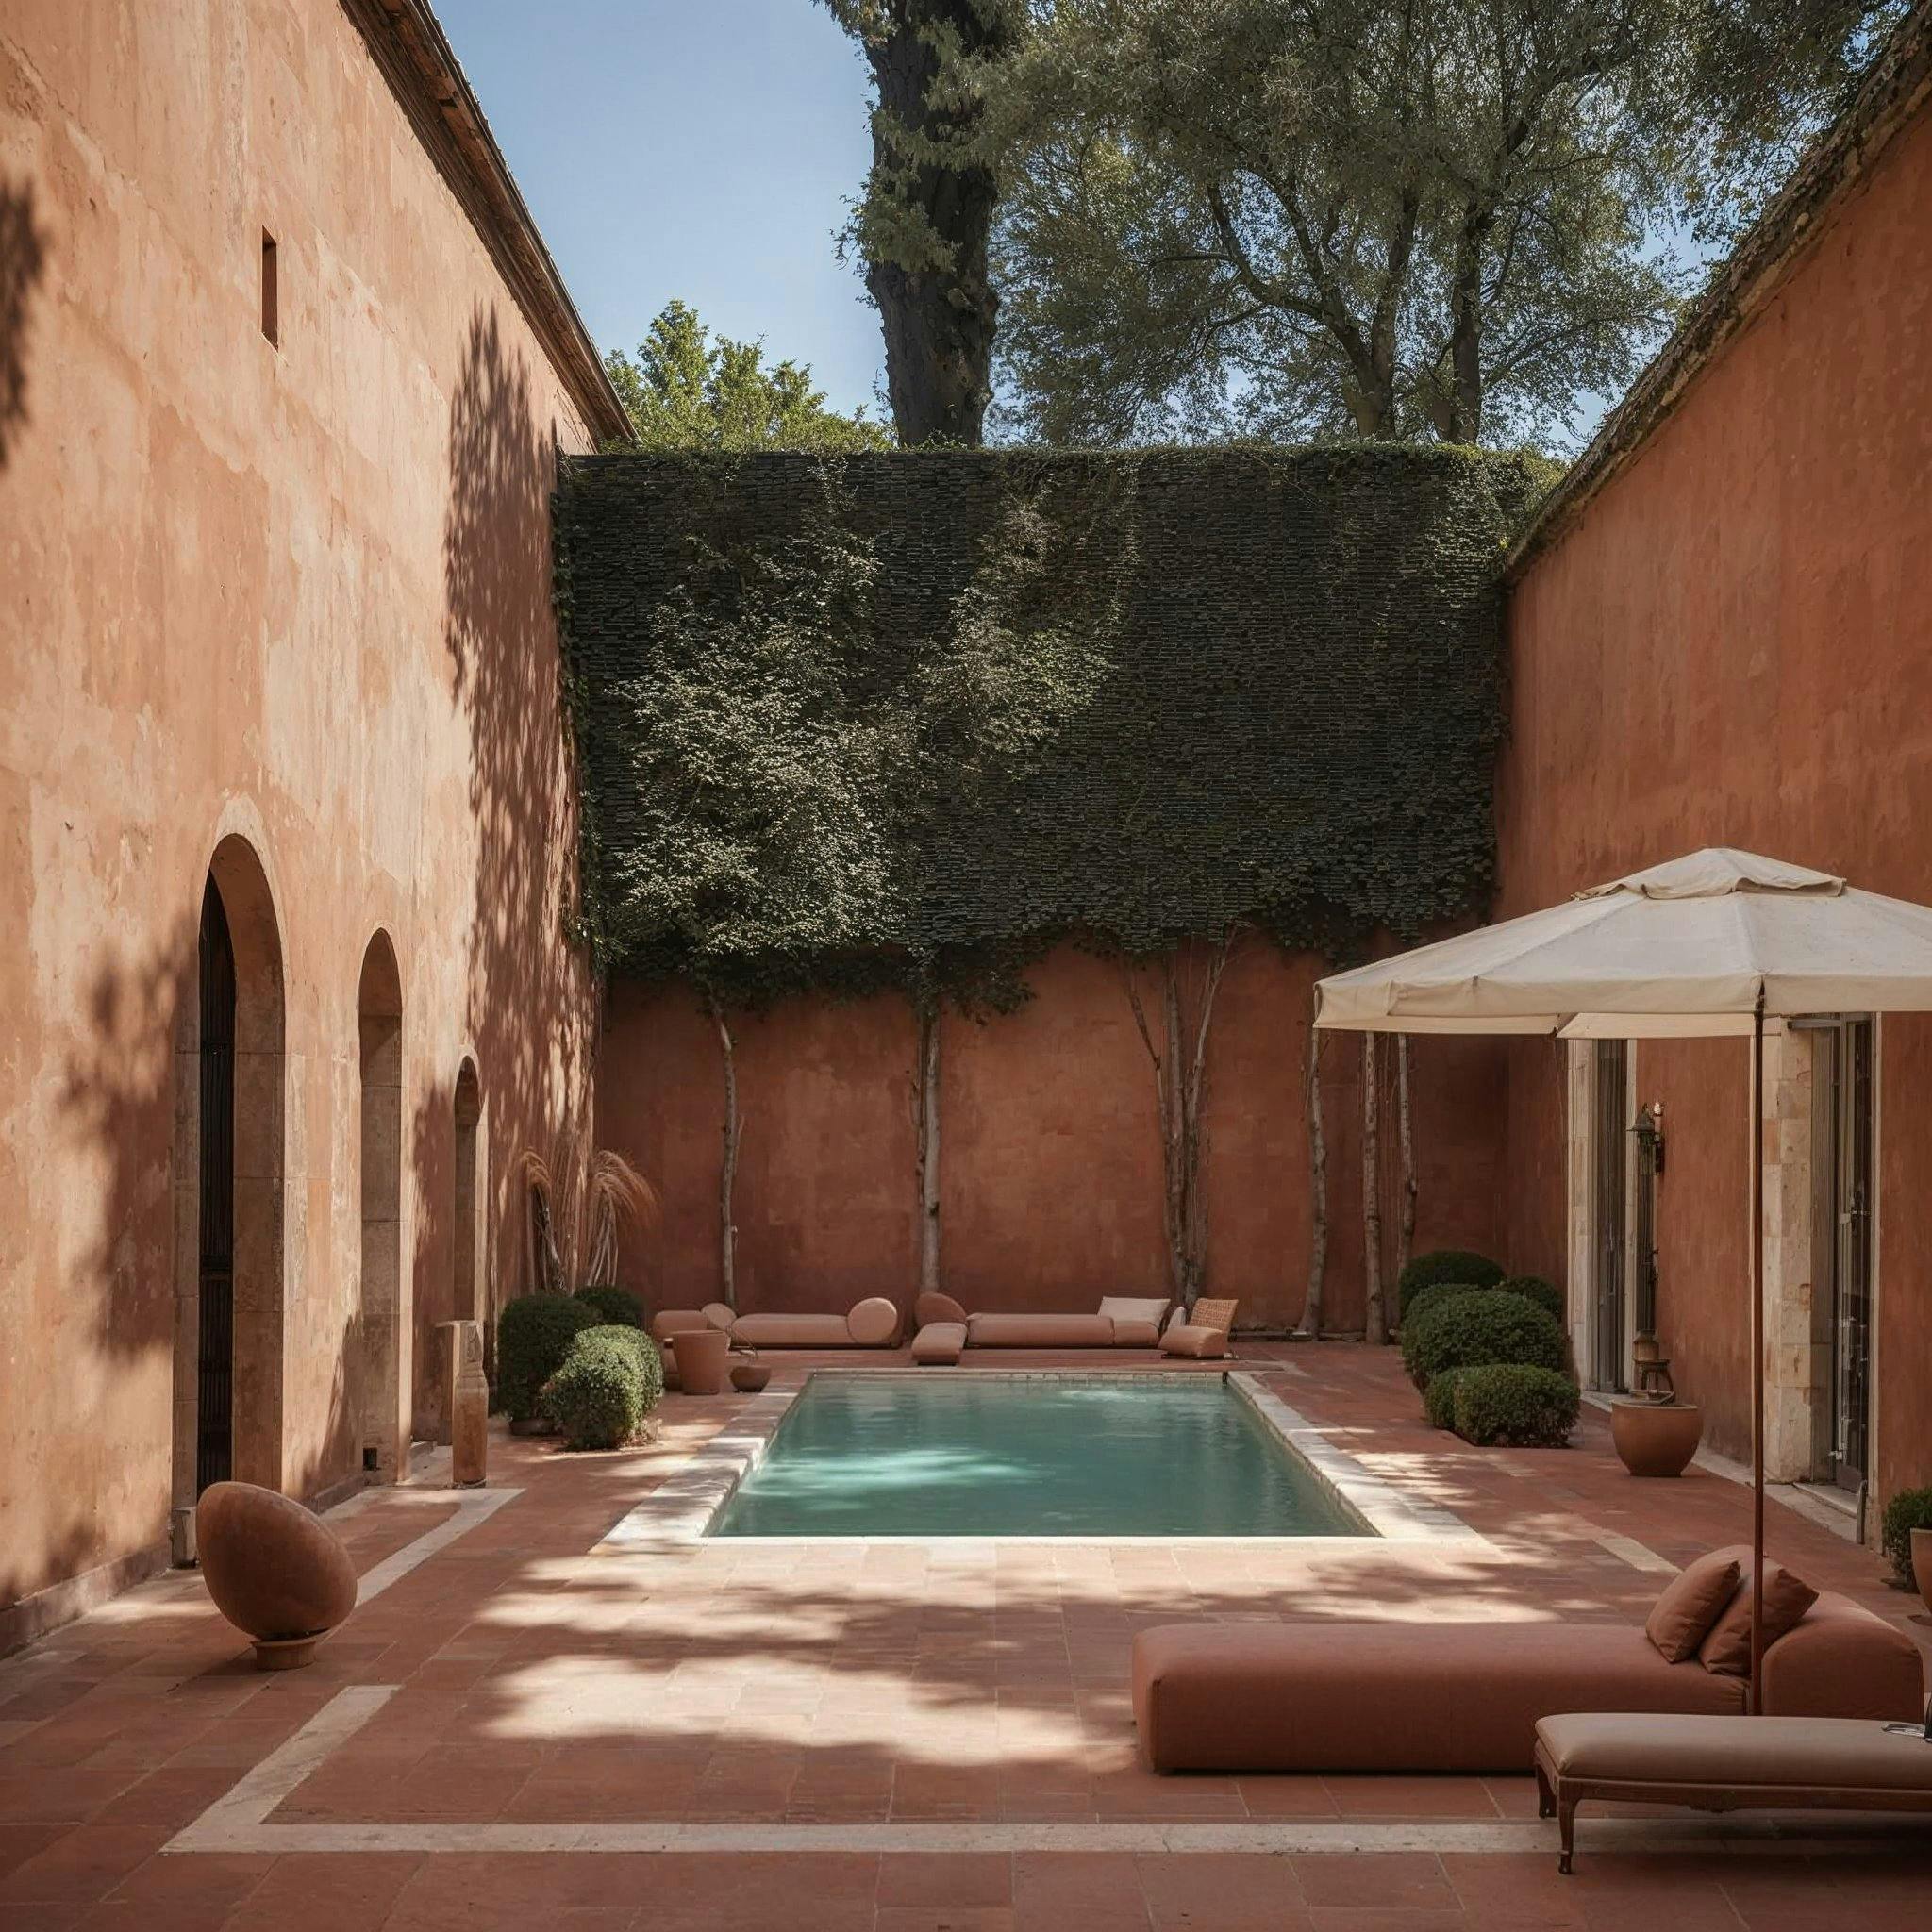 What if we imagined a Scene with an angular interior pool, reflecting an eclectic mix of terracotta and postmodern elegance?